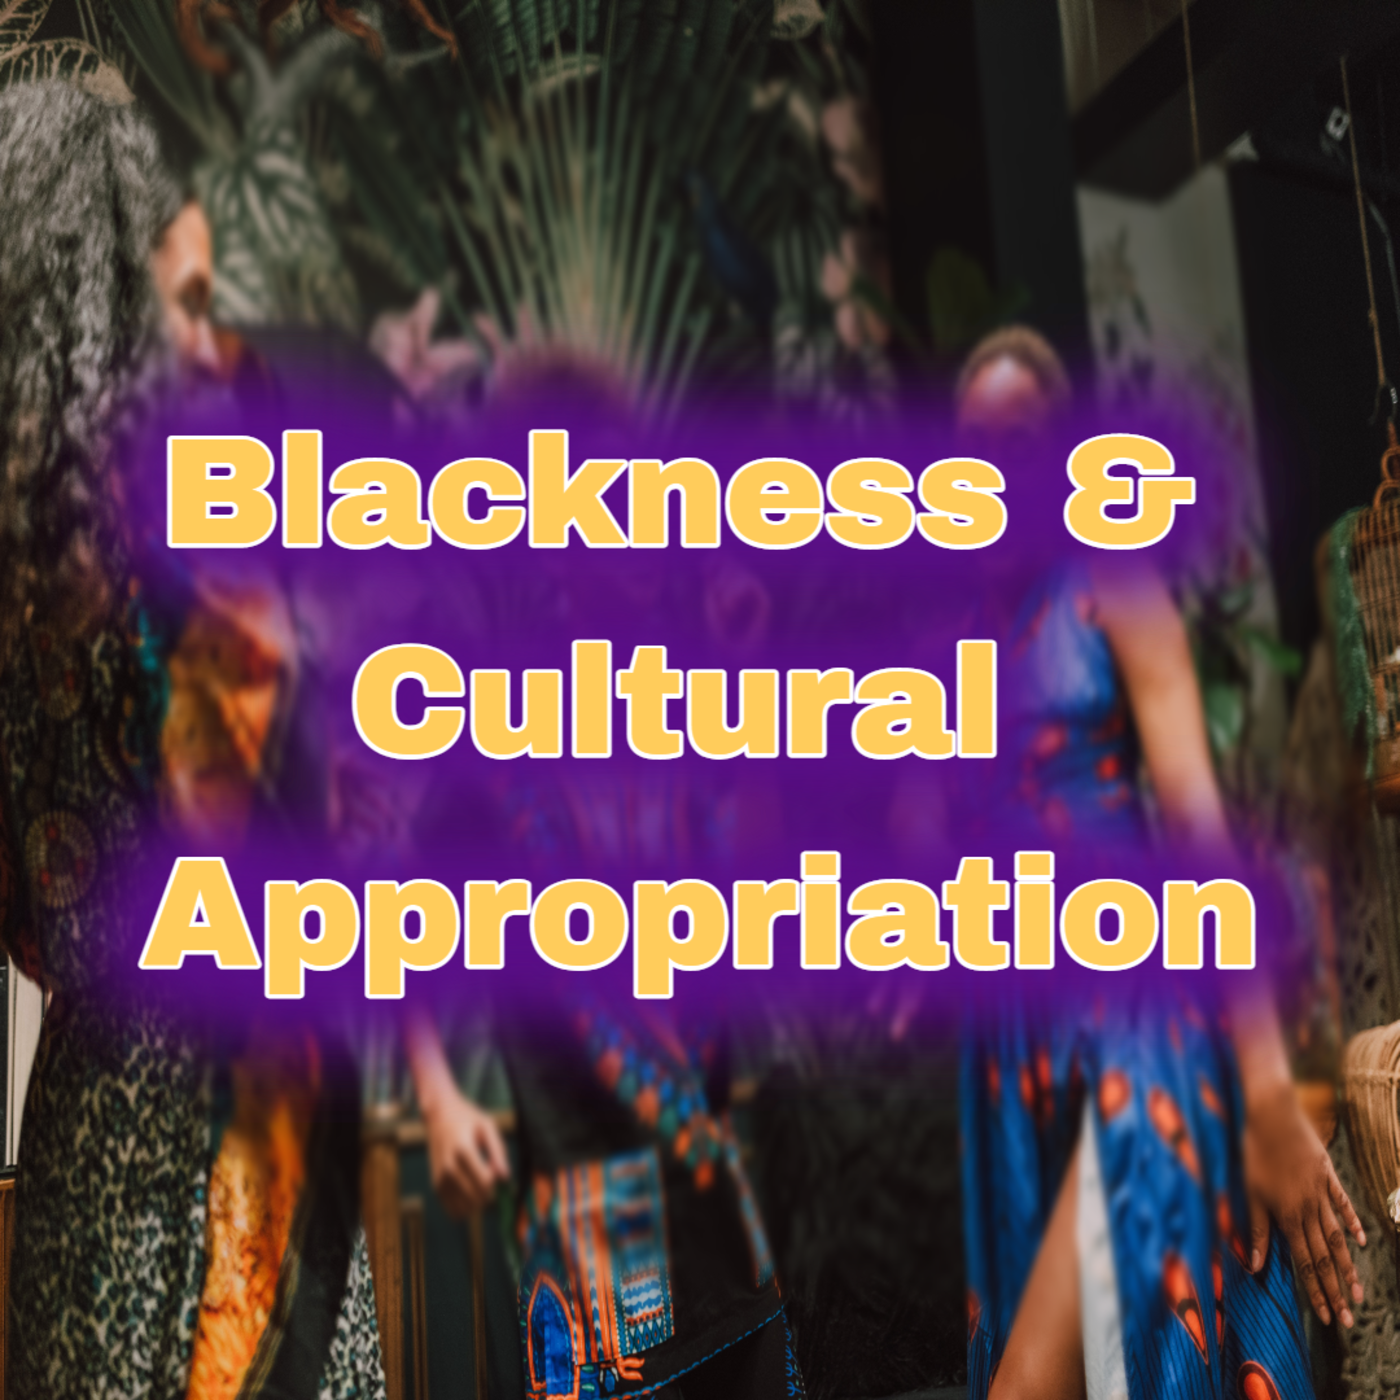 Blackness and Cultural Appropriation Image